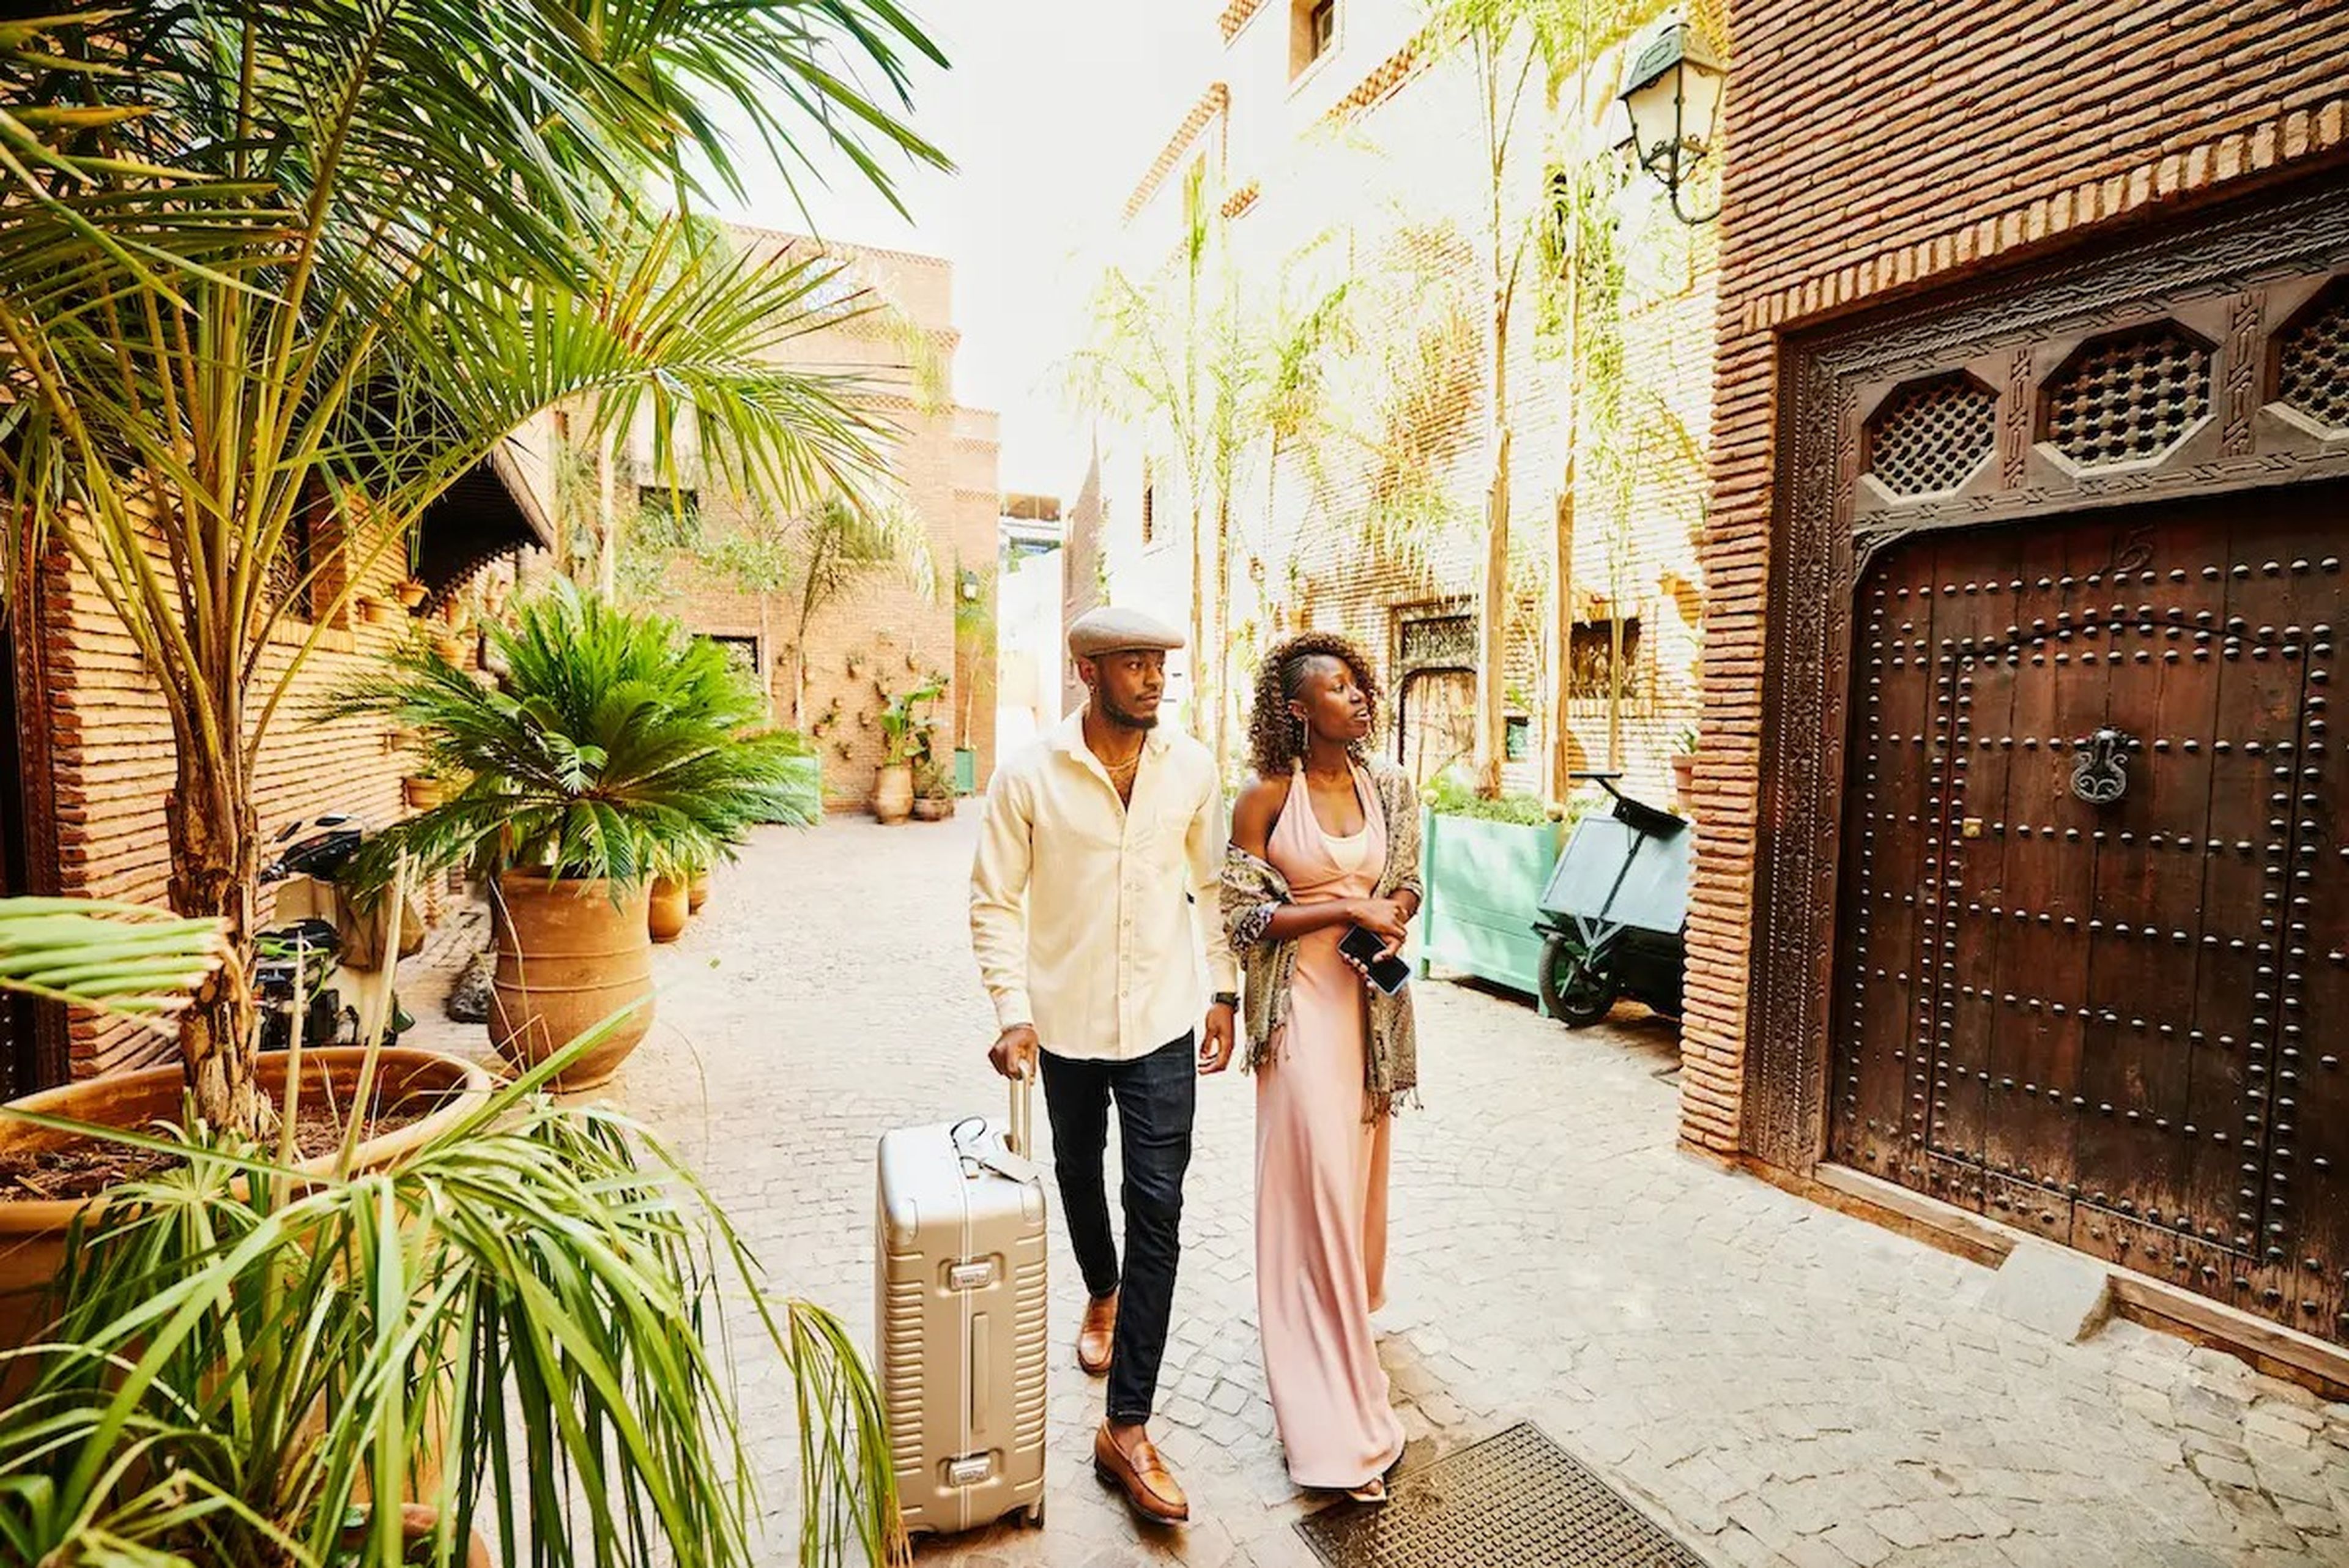 A couple roll a suitcase in a courtyard on vacation.